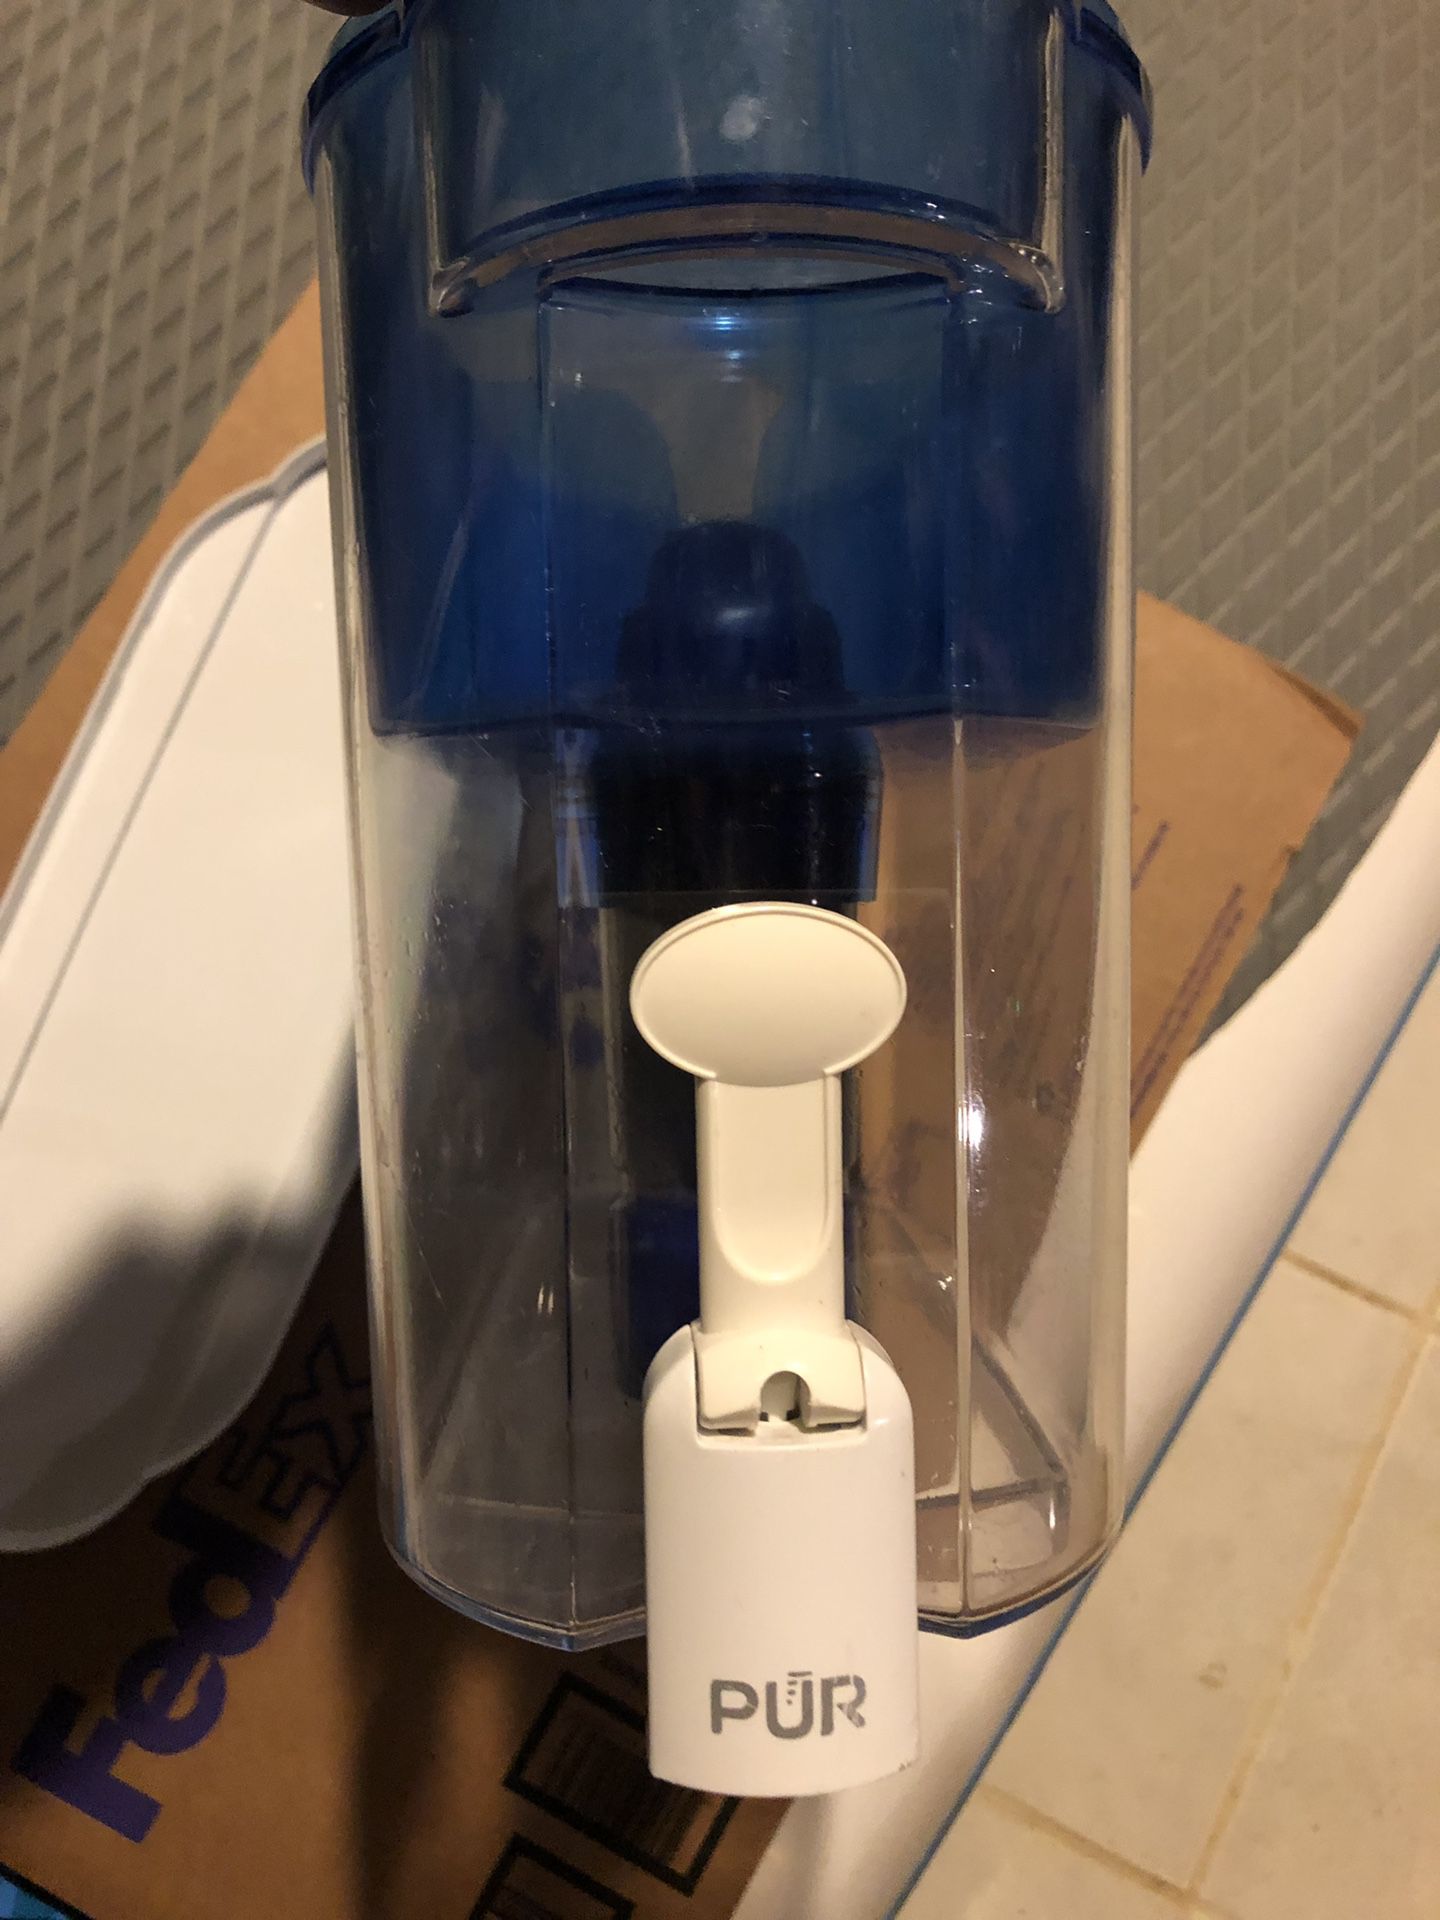 PUR Classic 18 Cup Water Dispenser